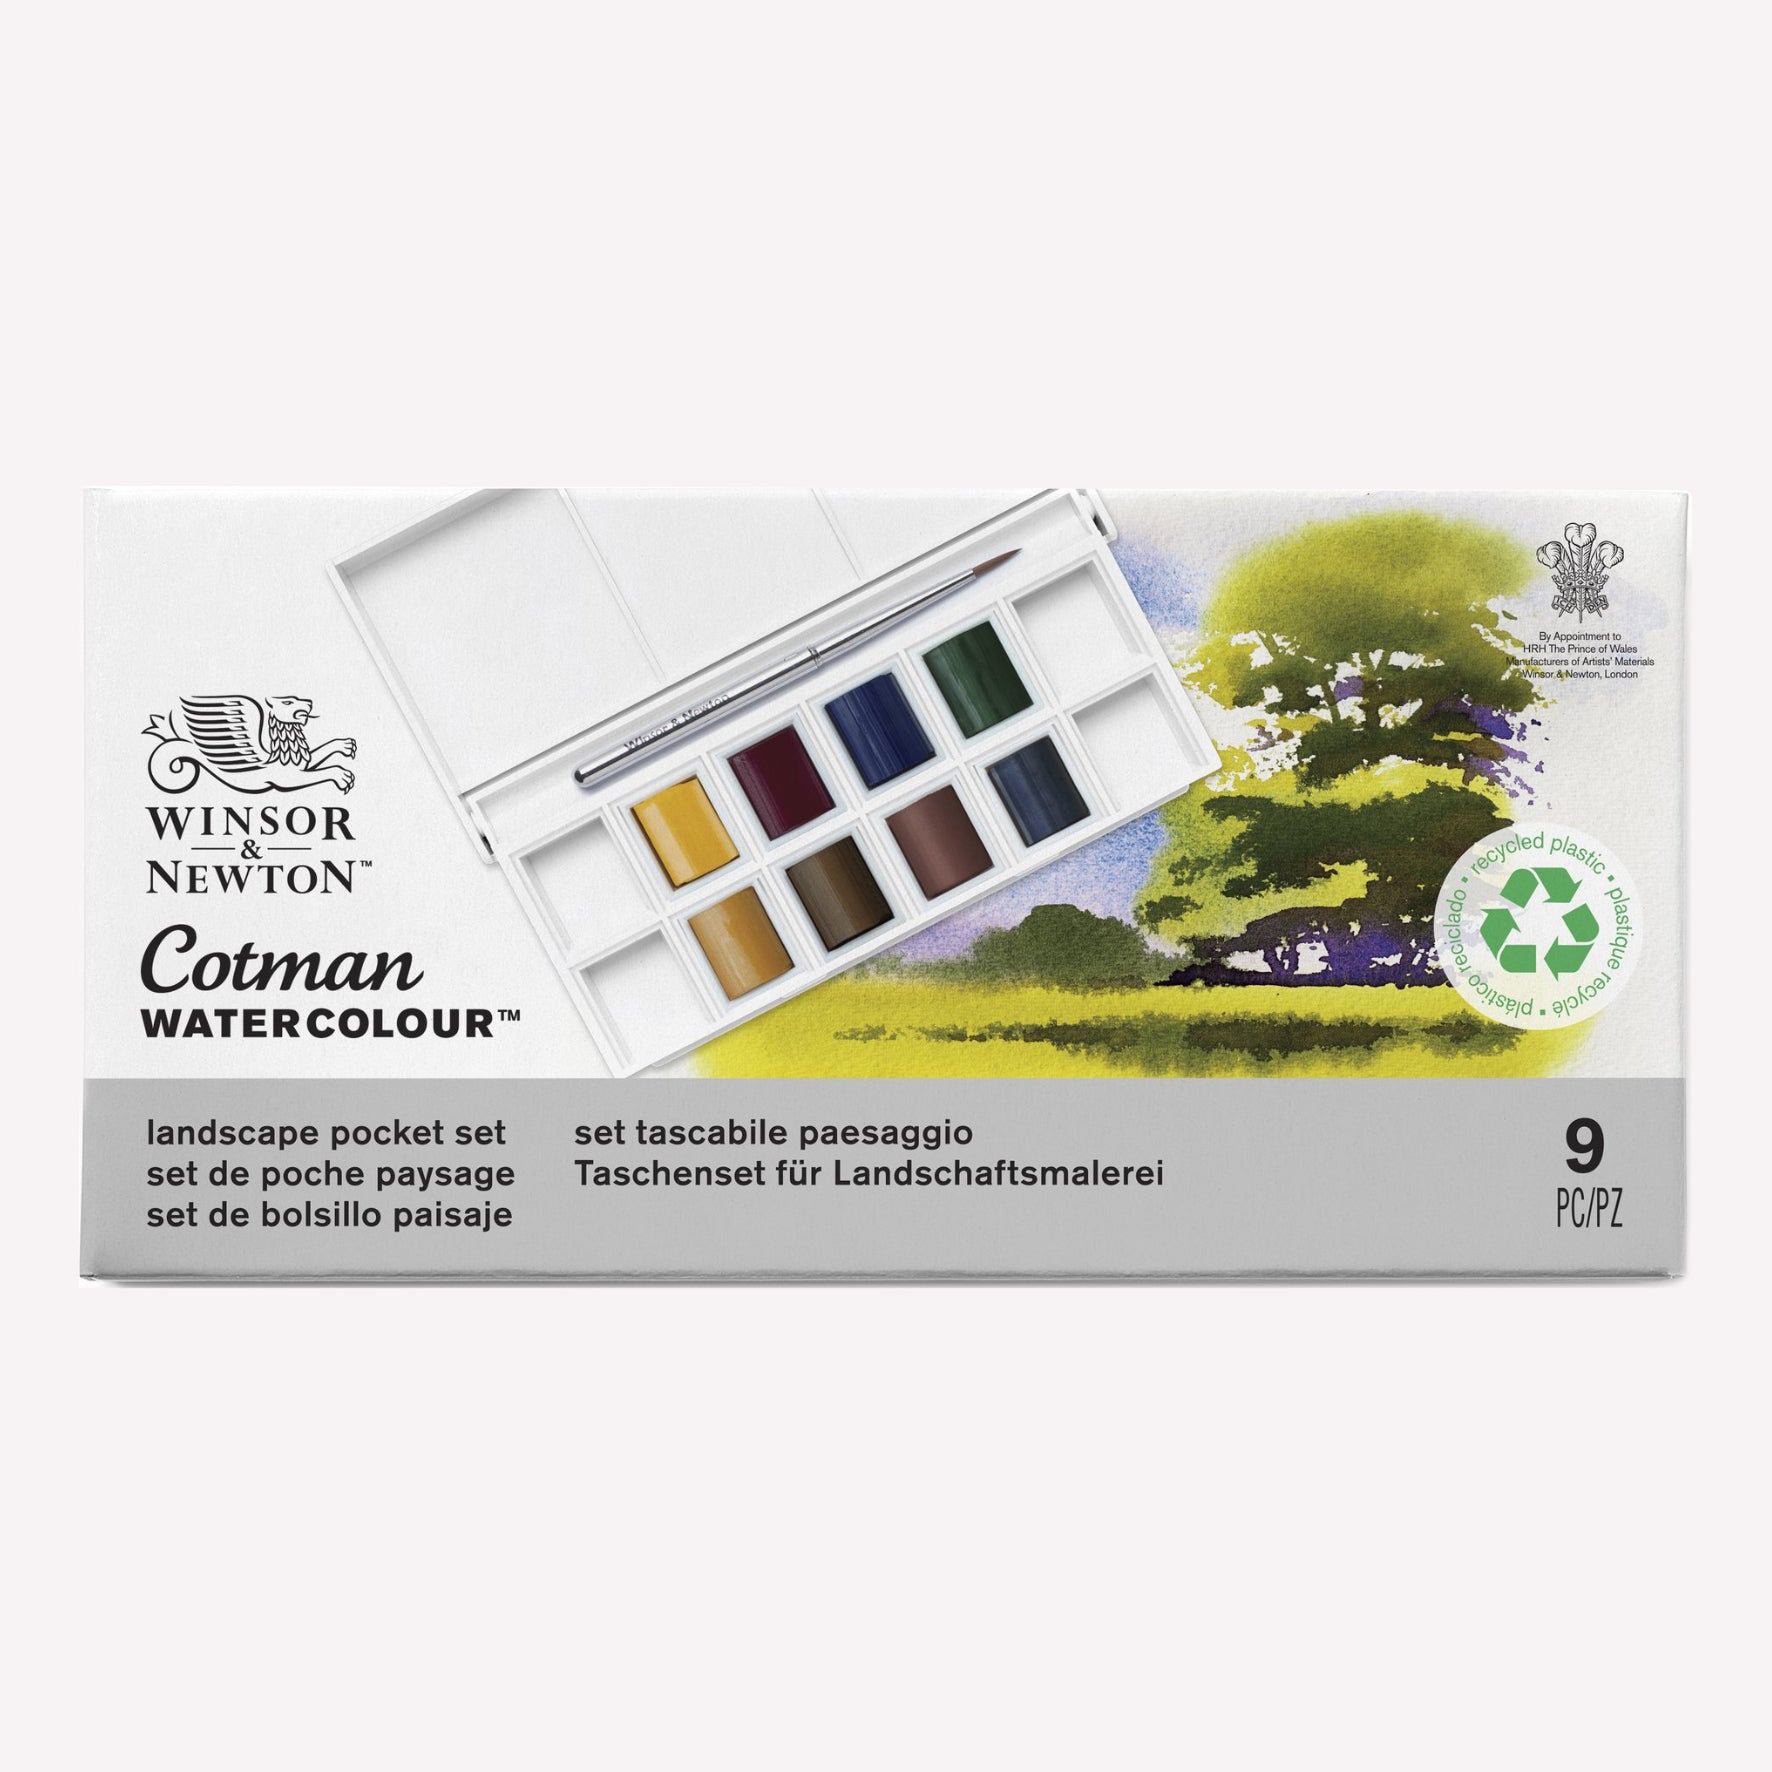 Cotman Watercolour Landscape pocket set, presented in packaging that shows the 8 half pans included, alongside examples of a landscape painting you can create using this set.